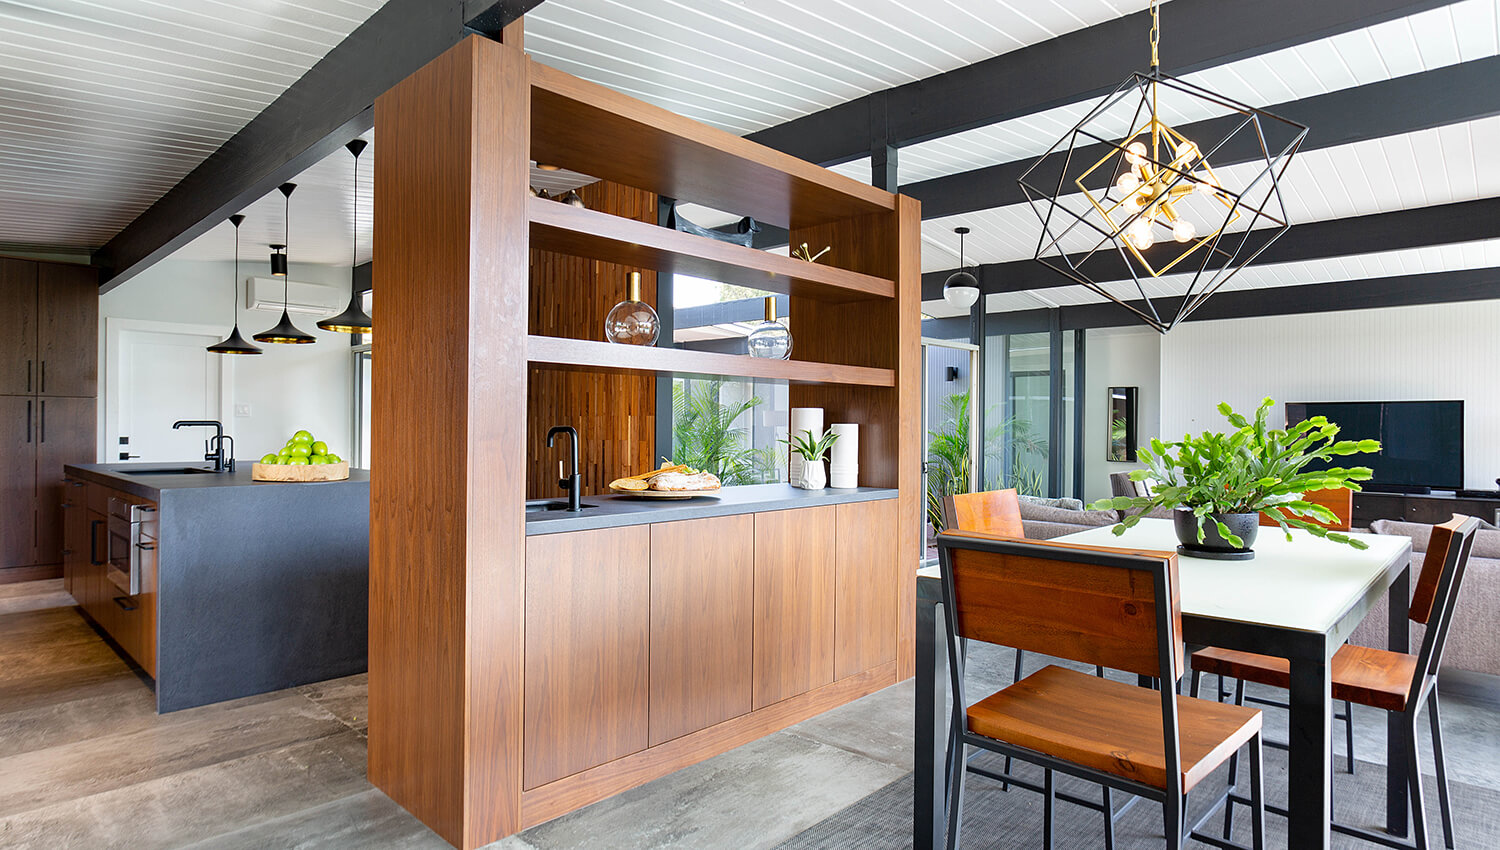 A room divider made with cabinetry in a mid-century modern new home build.